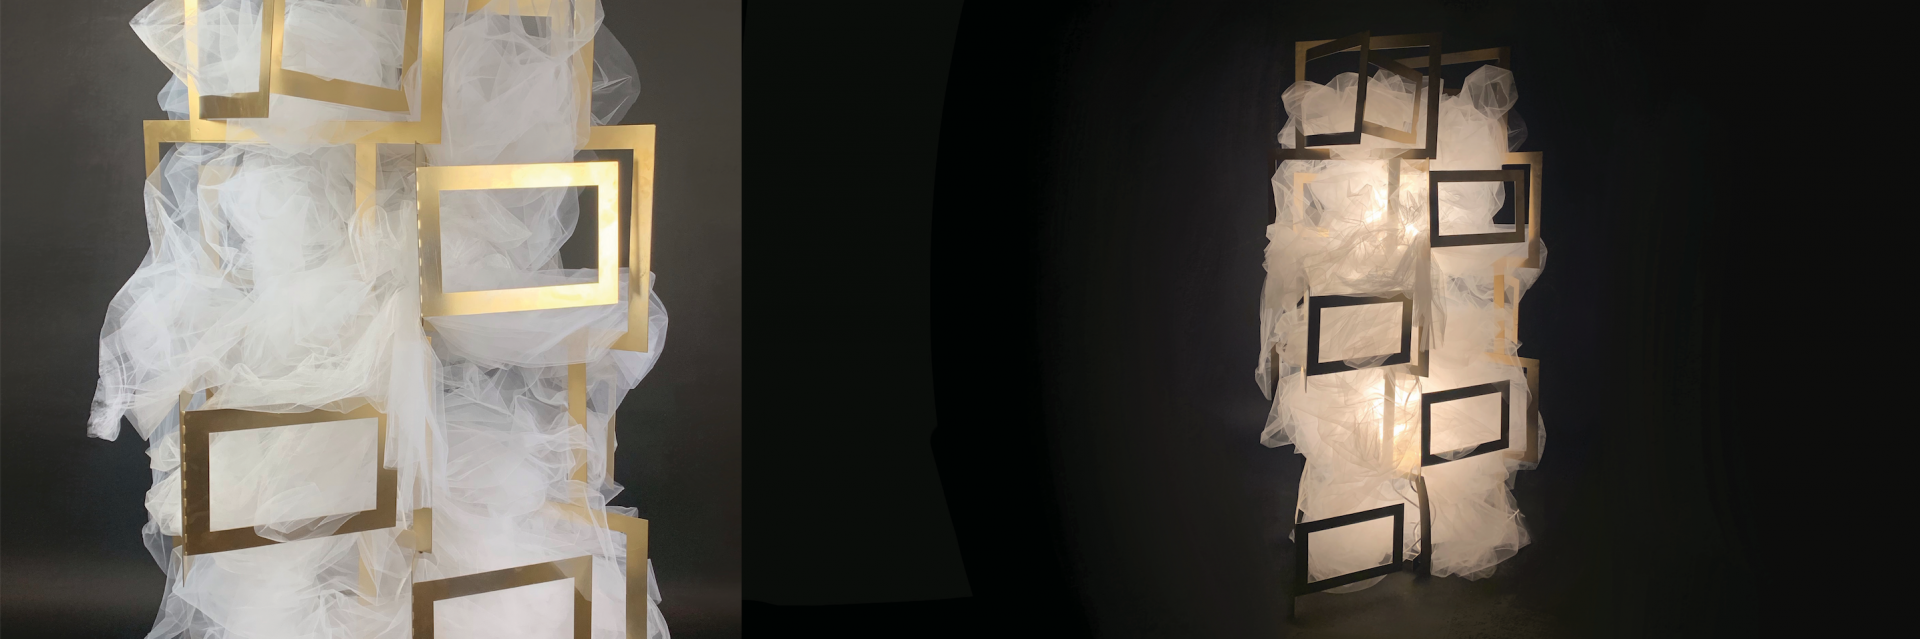 Two images of a lighting fixture. The left image is a close up, detailing the gauze and gold elements of the fixture. The right image displays the lamp on in full display.